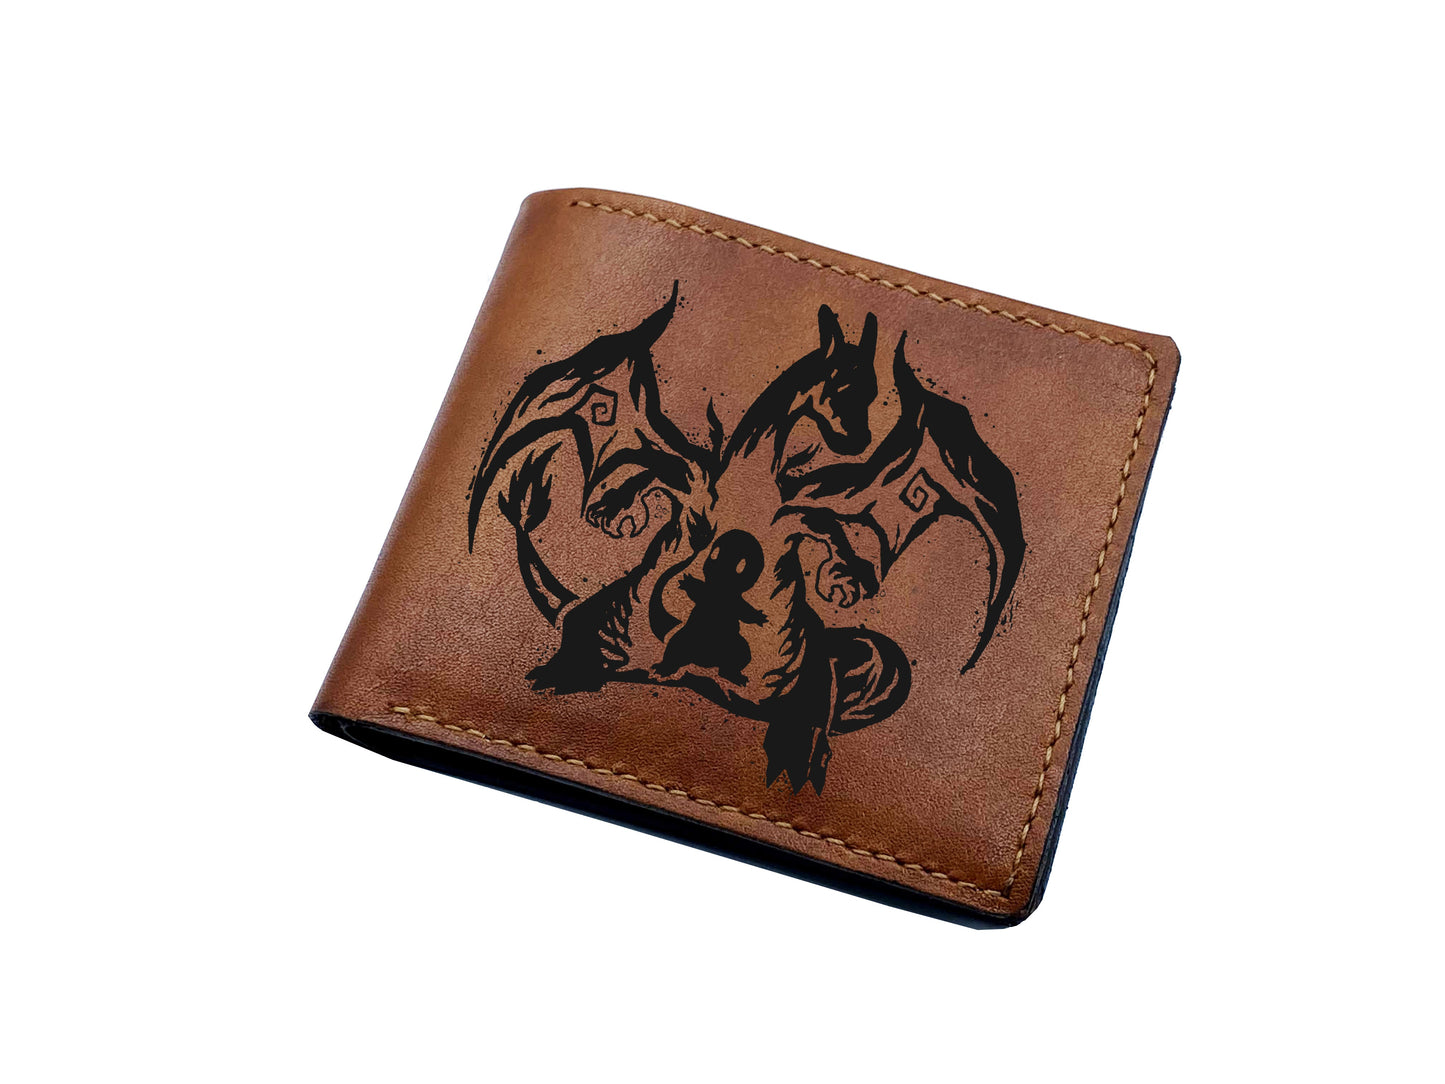 Mayan Corner - Customized leather pokemon wallet, pokemon leather gift, charmander pokemon evolution gift ideas, birthday gift for him